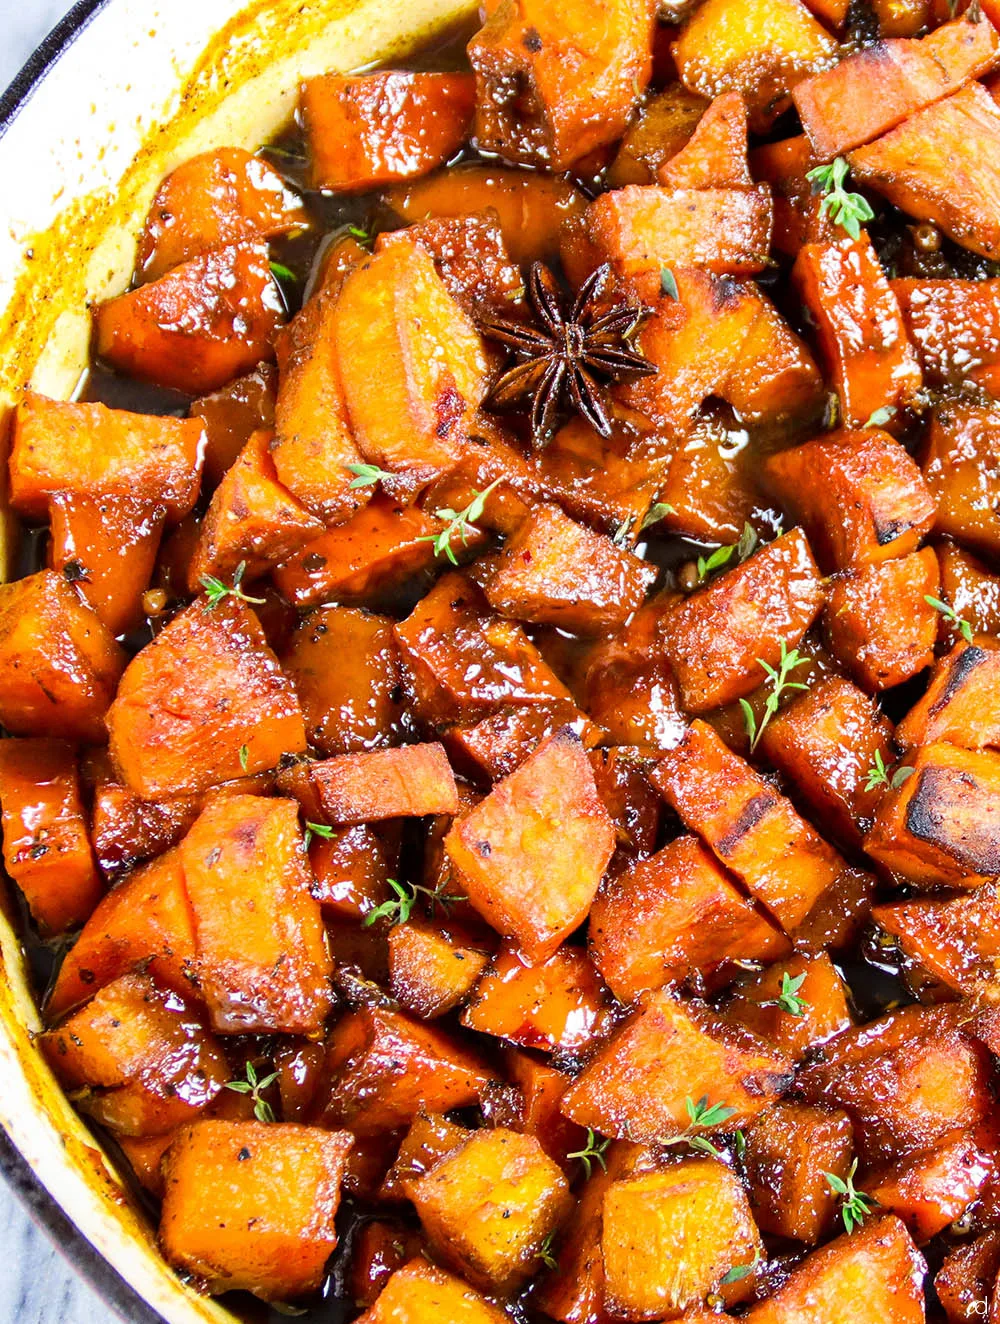 Spicy Roasted Sweet Potatoes with Sweet Onion, Rosemary & Chili Flakes